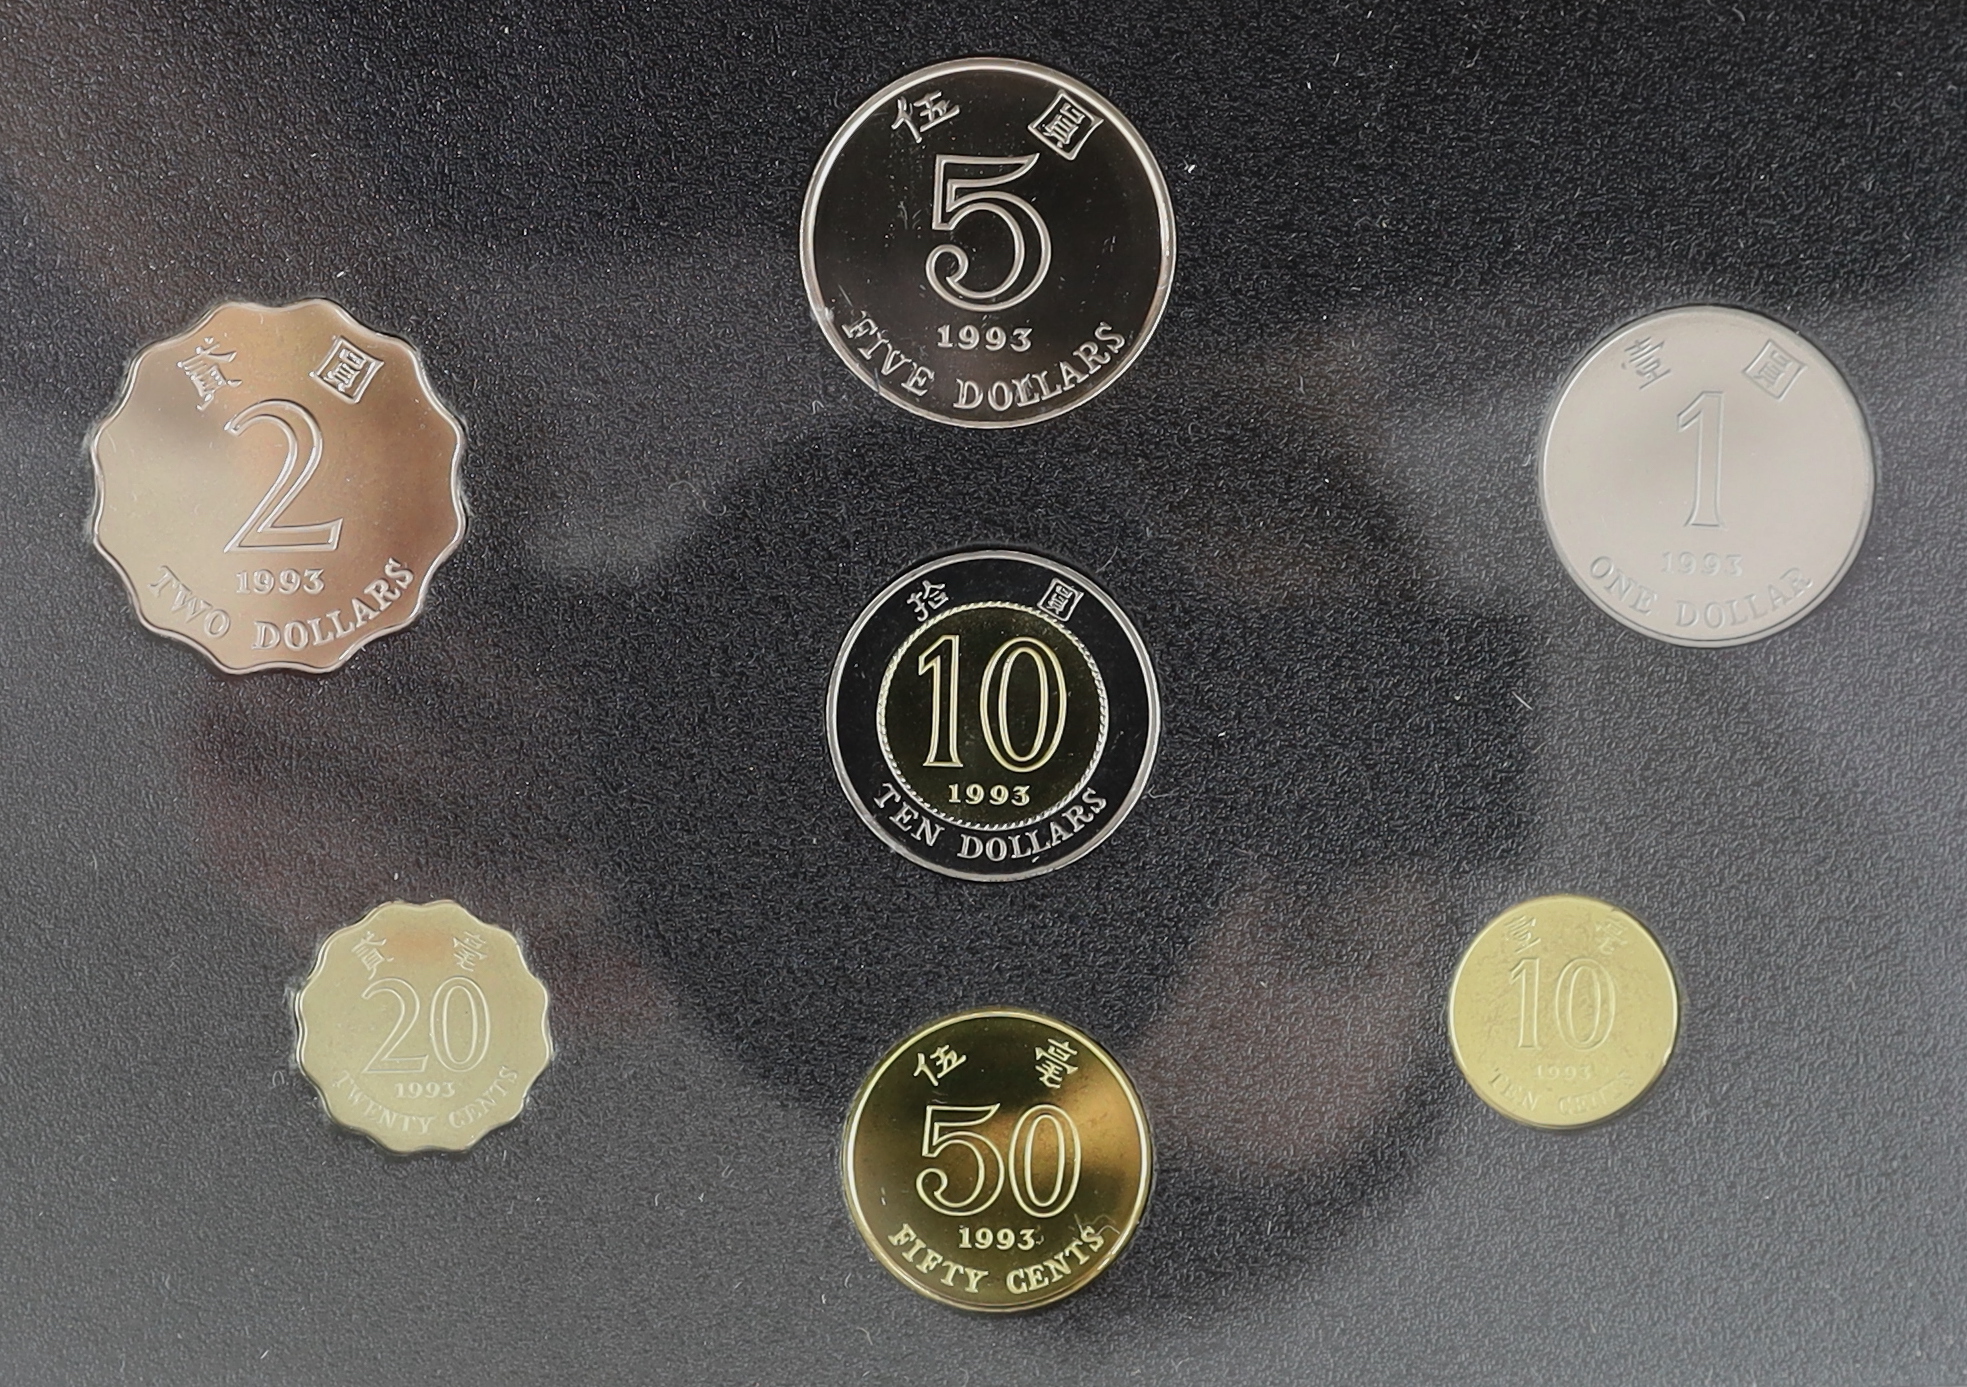 World coins and collector’s packs, to include Royal Canadian mint proof coin year set, 1981, with silver $1, UK year of the horse 1 ounce silver £2, Hong Kong proof coin you set, 1993, Australia’s new solid silver holey